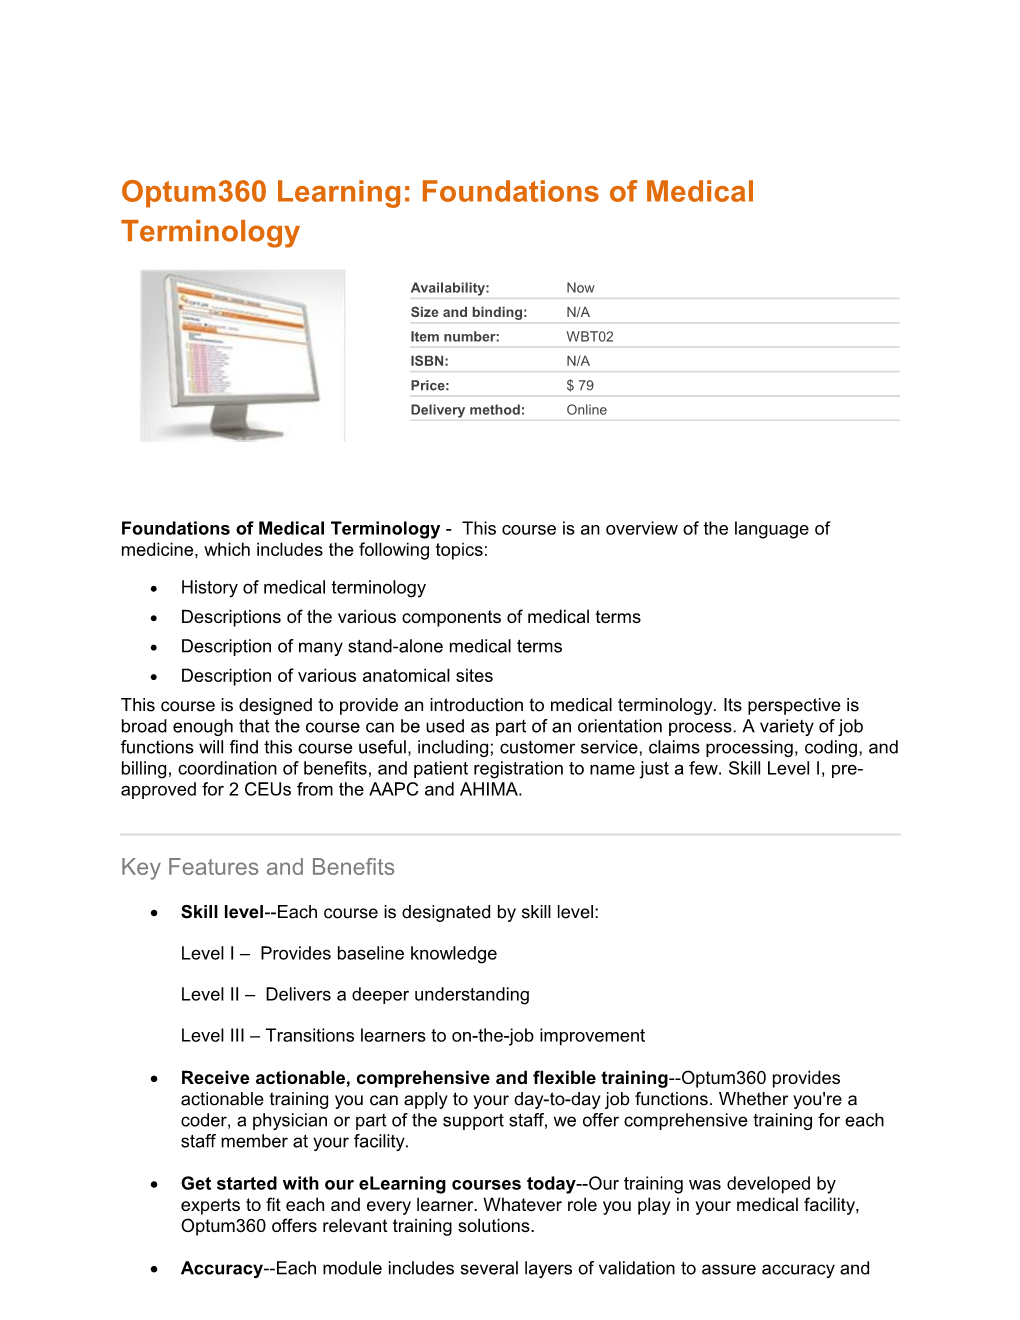 Optum360 Learning: Foundations of Medical Terminology